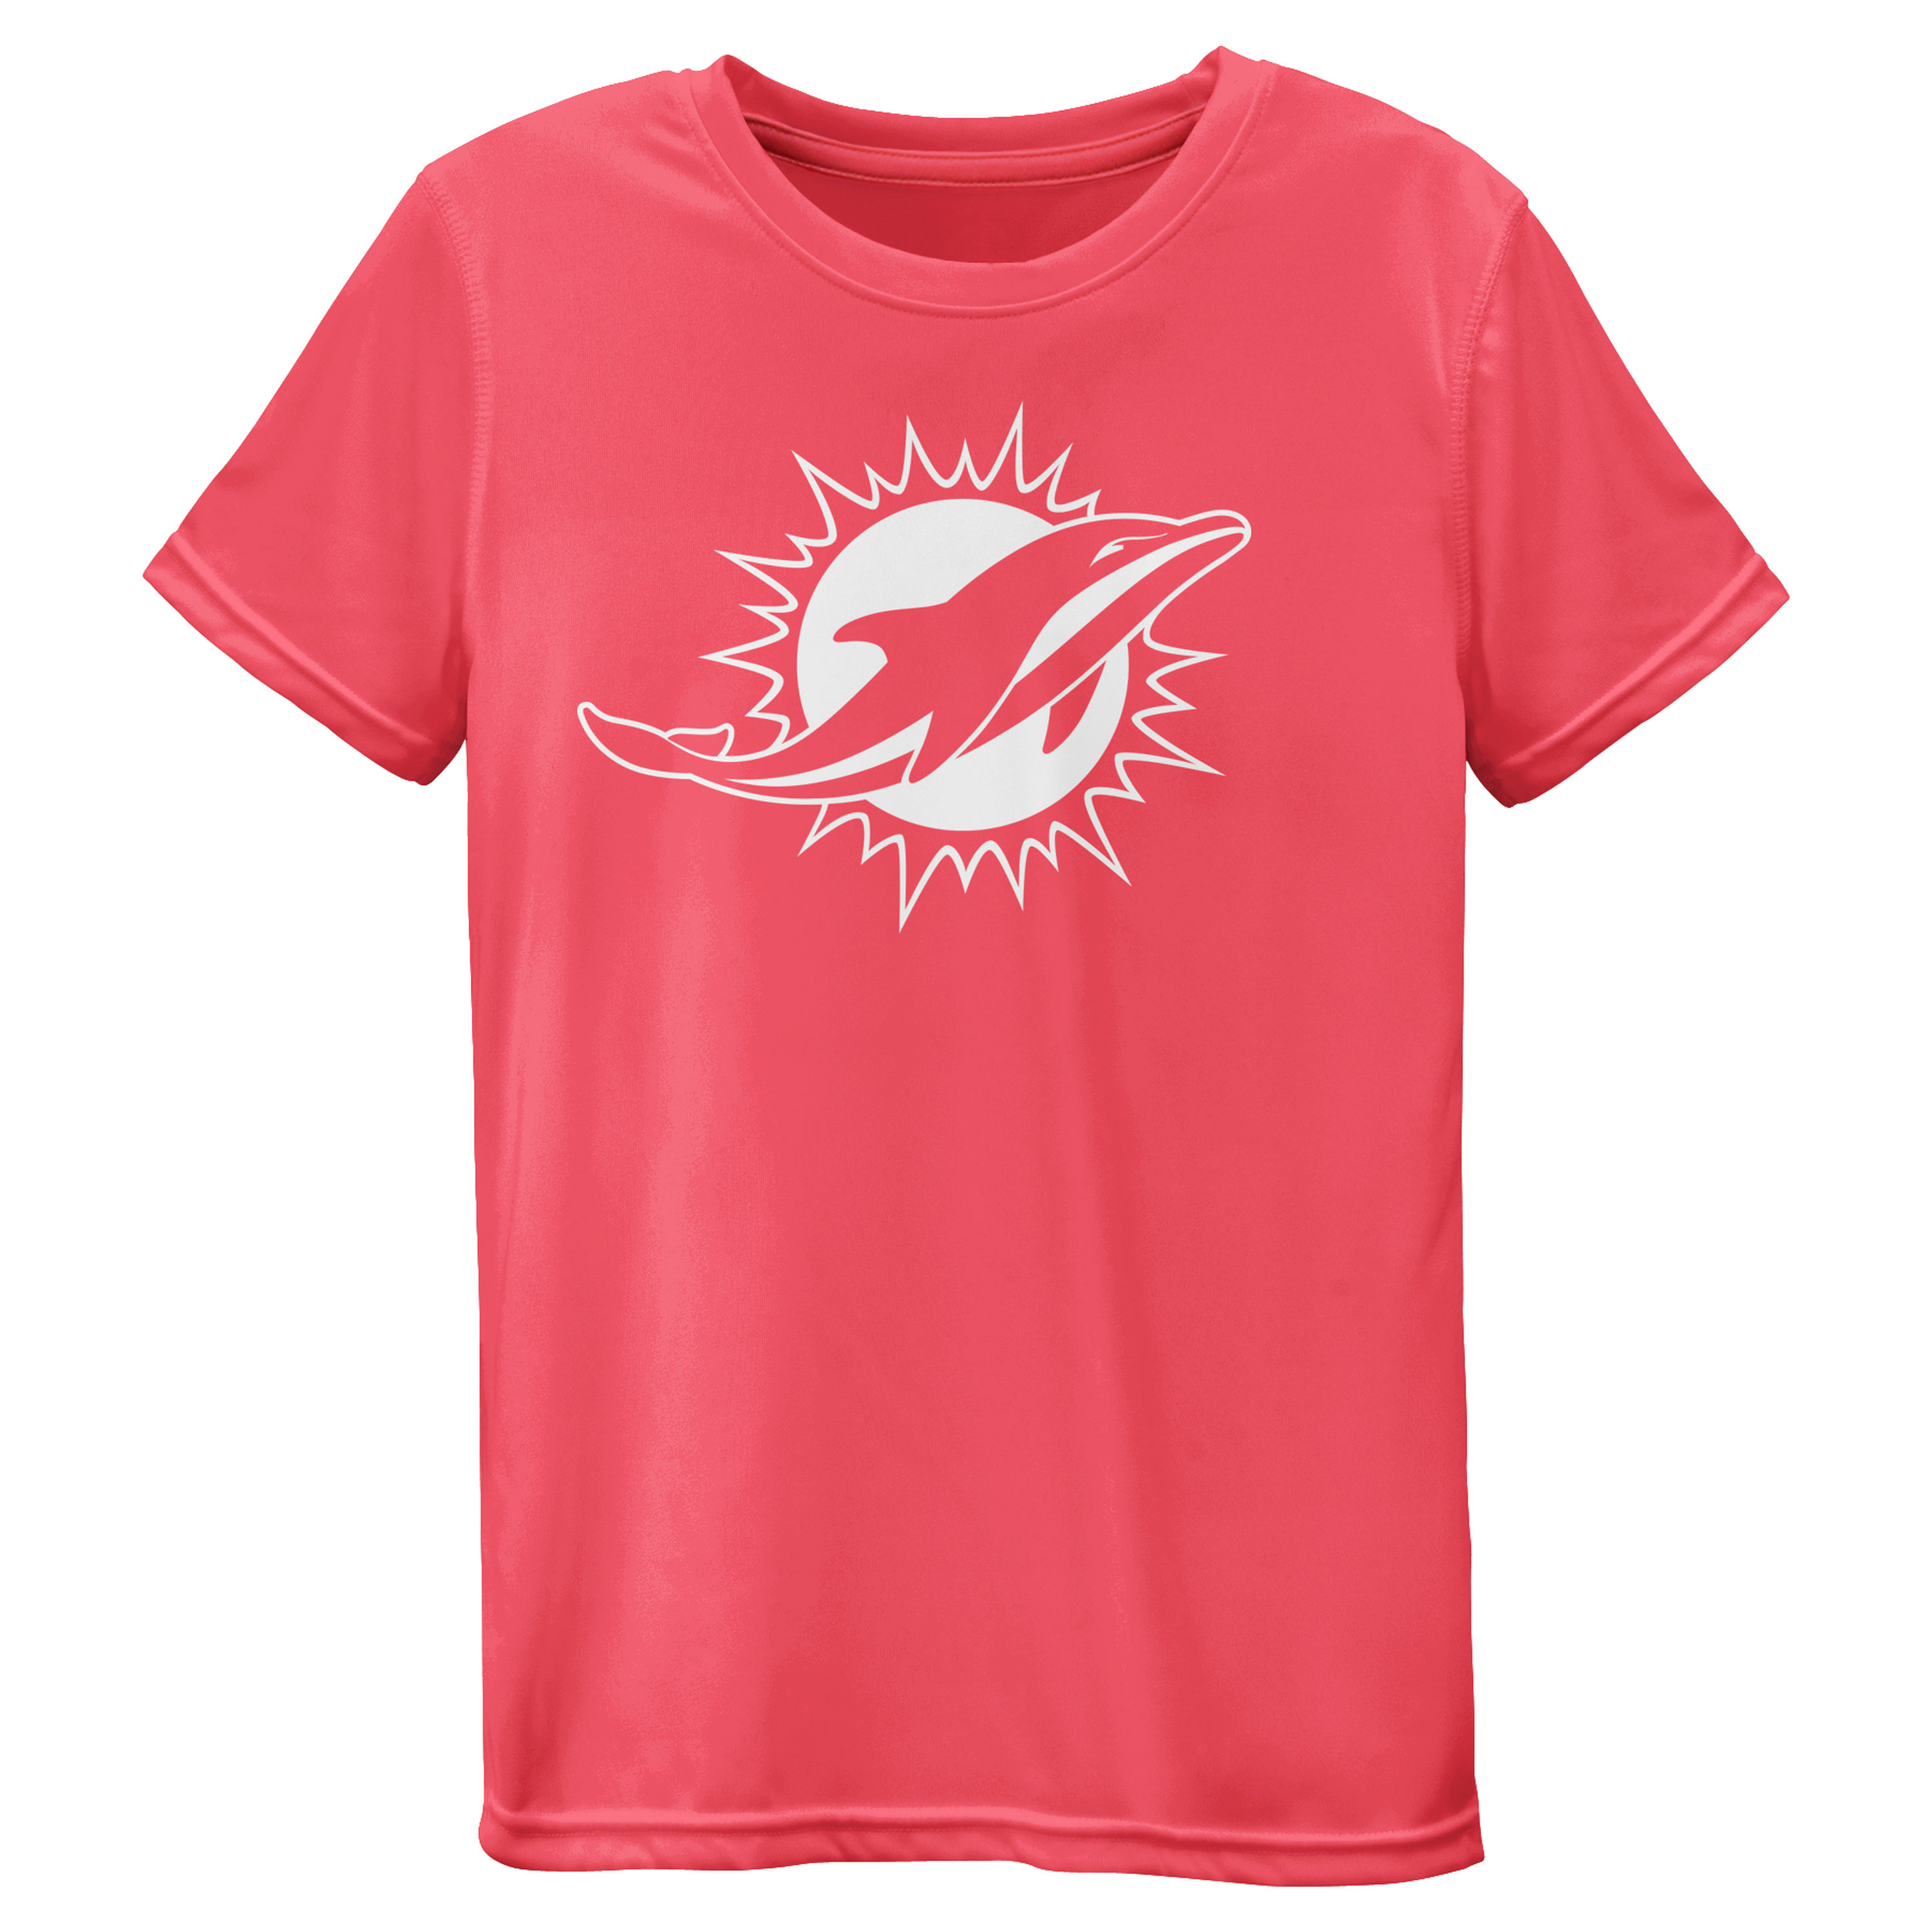 Miami Dolphins Girls Youth Pink Neon Logo T-Shirt